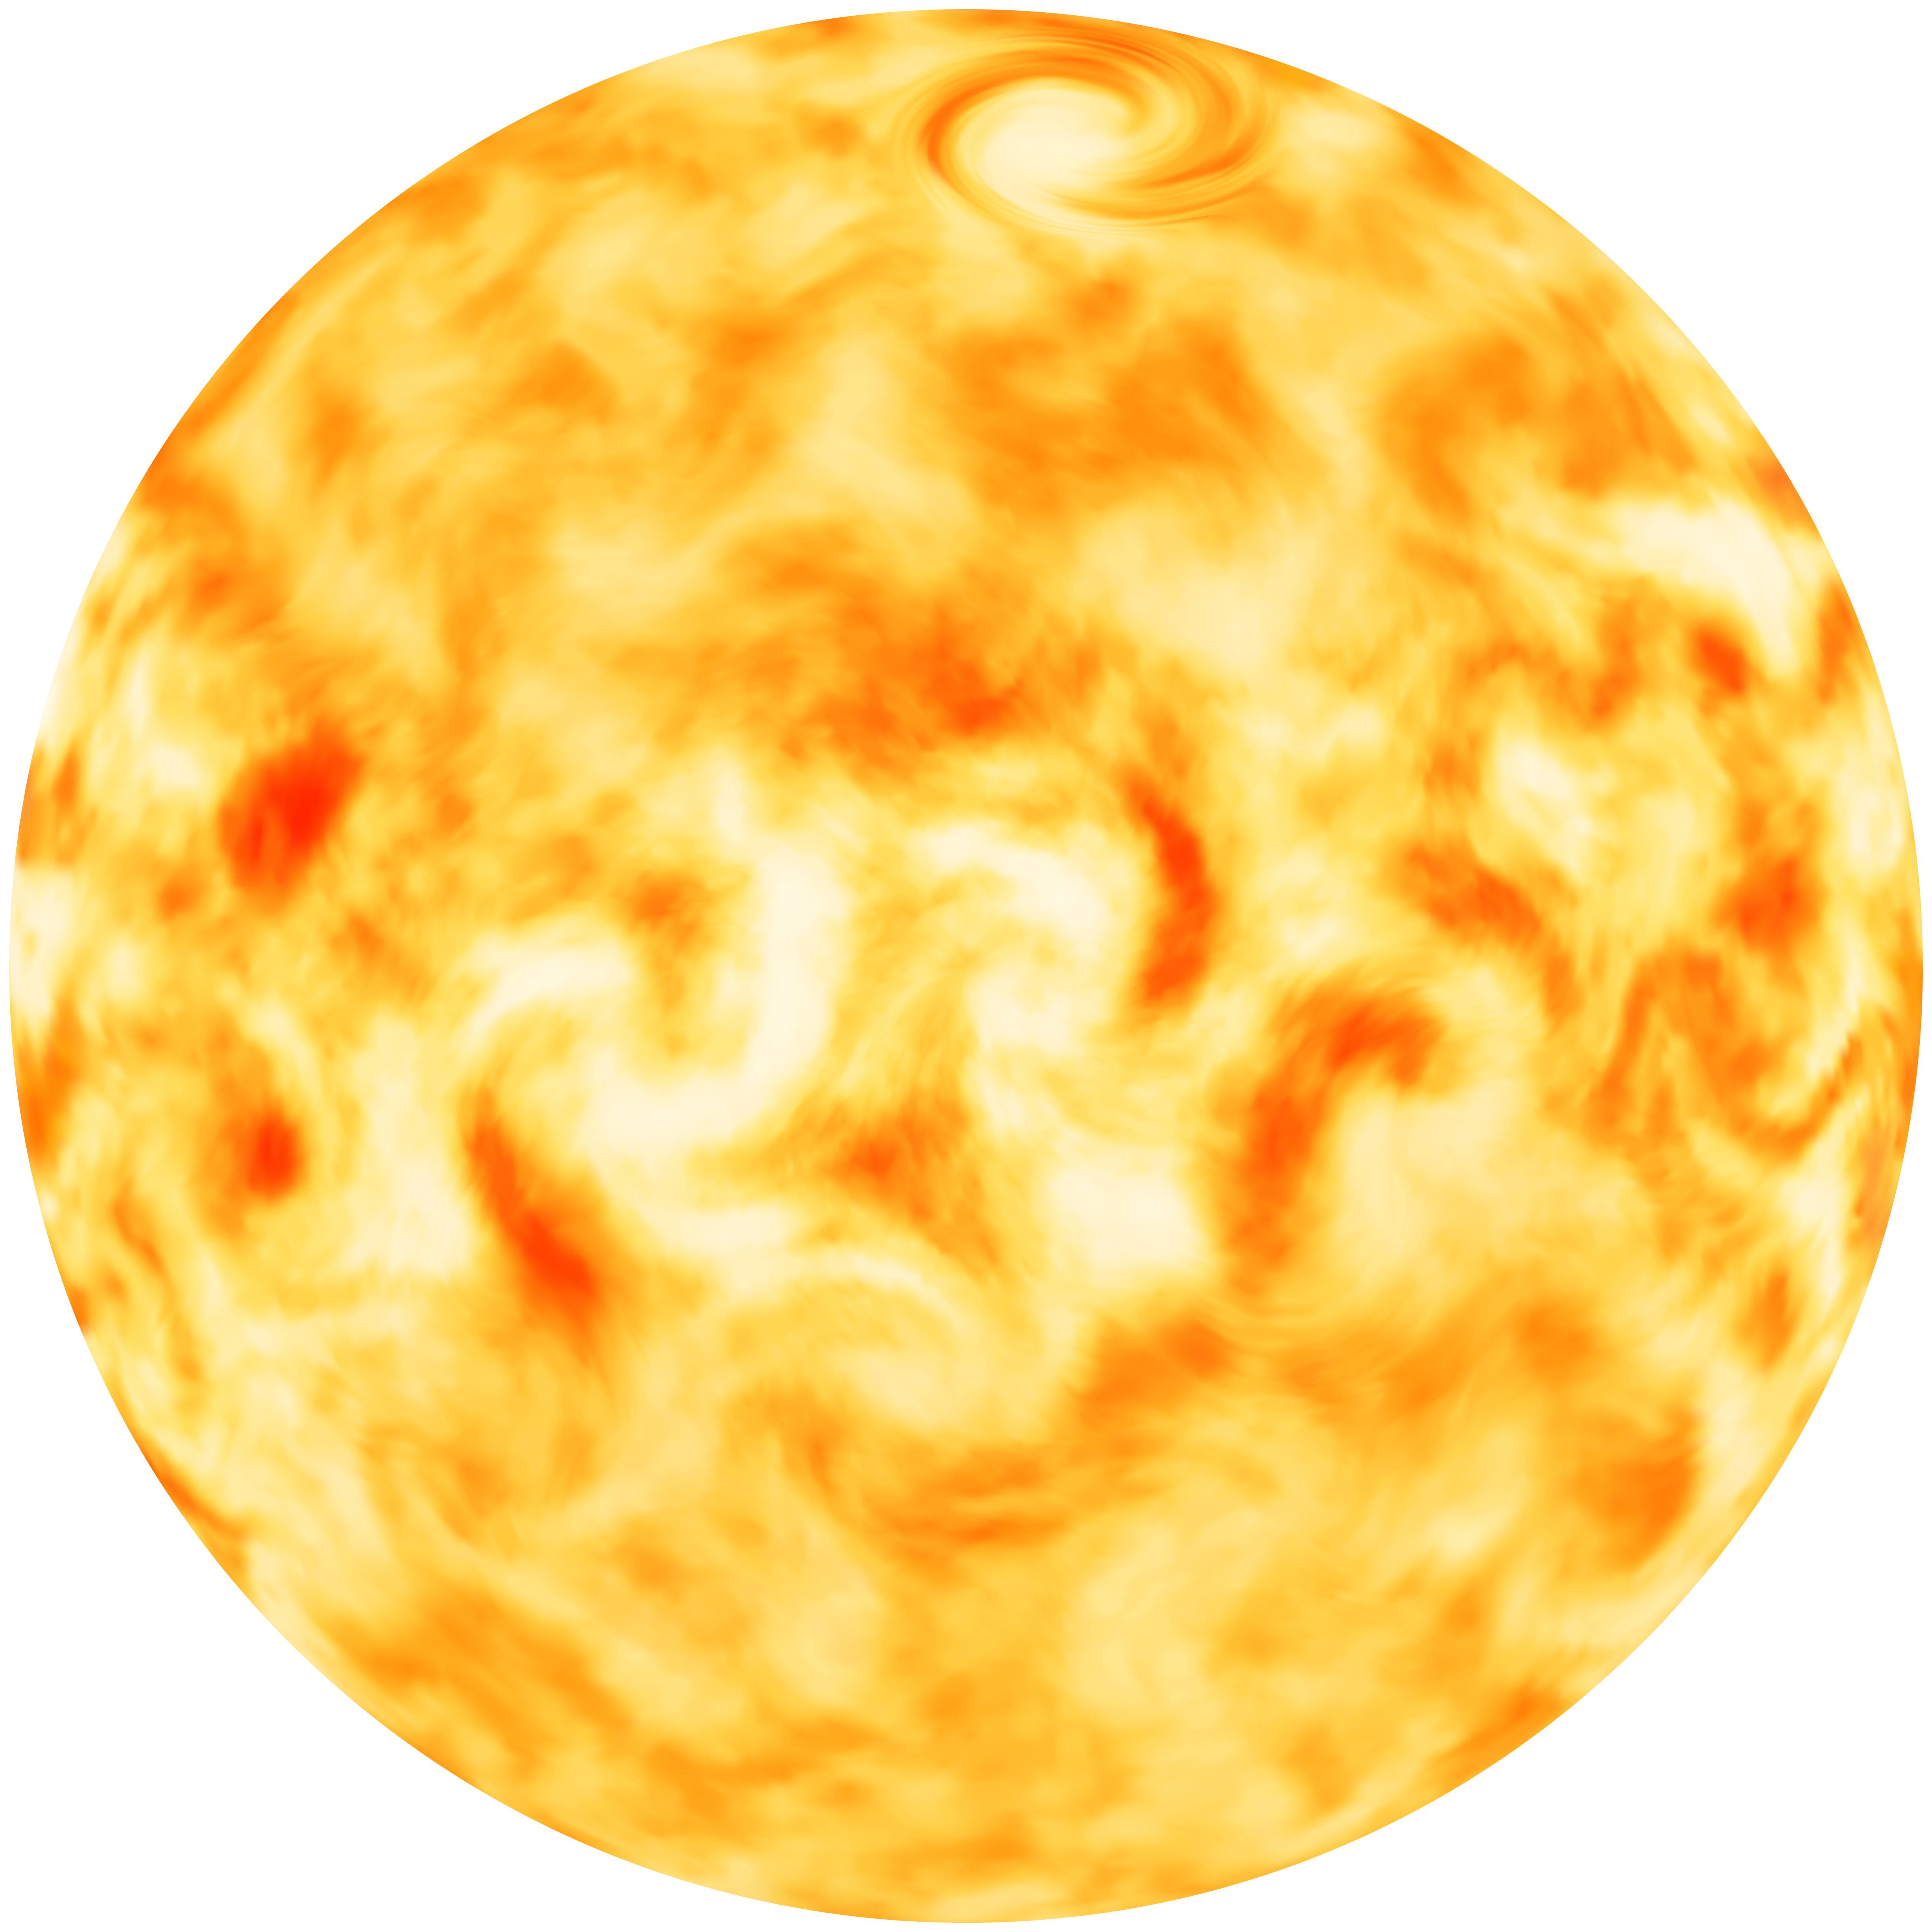 Sun png clip art. Planets clipart yellow planet